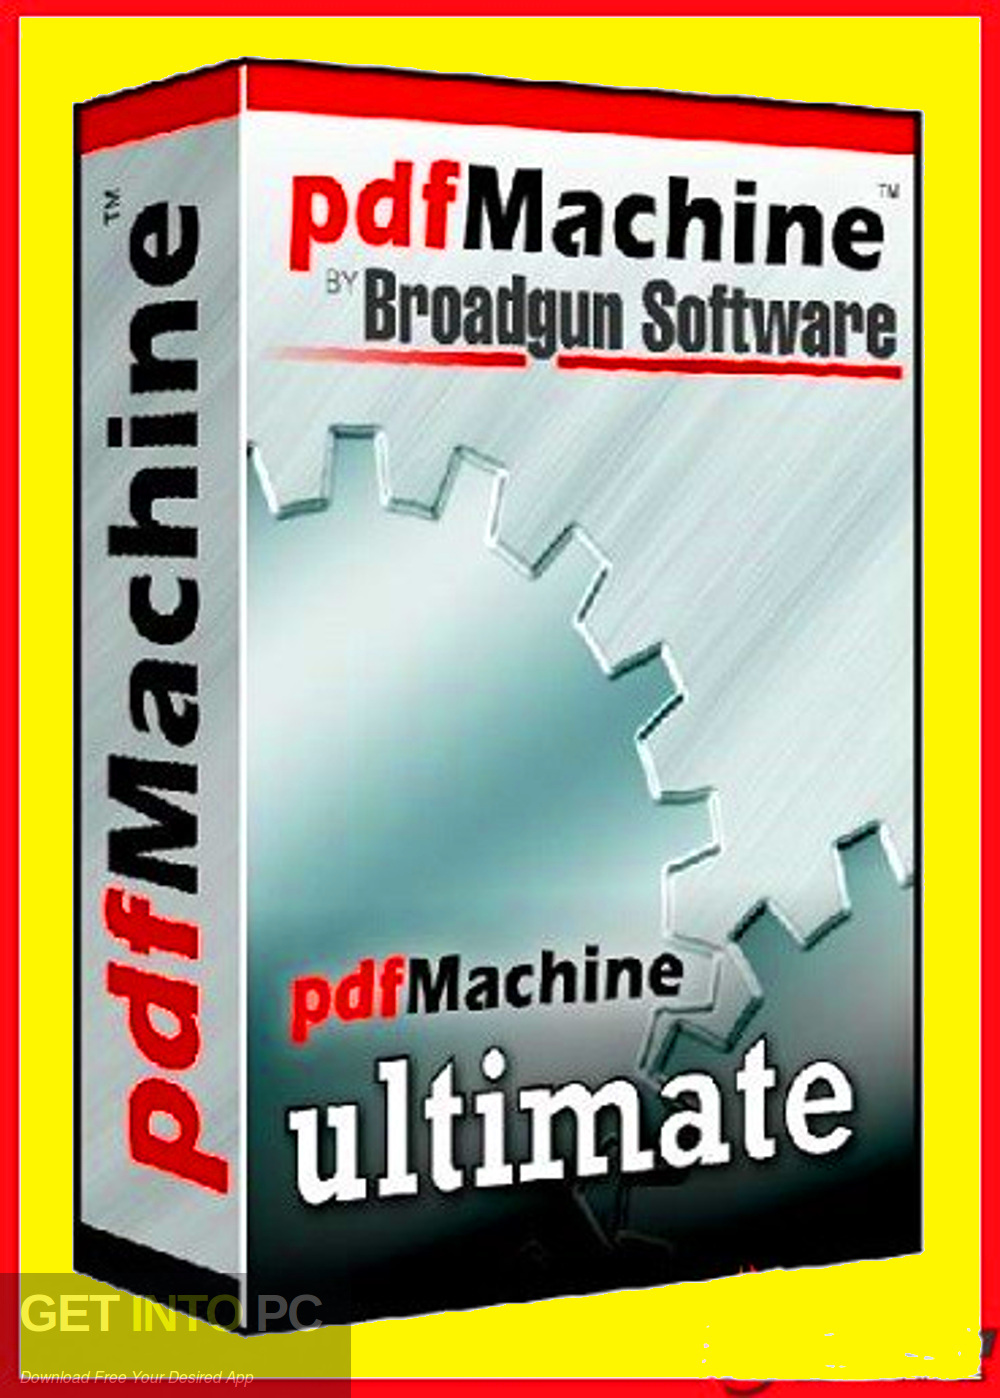 pdfMachine Ultimate Free Download GetintoPC.com